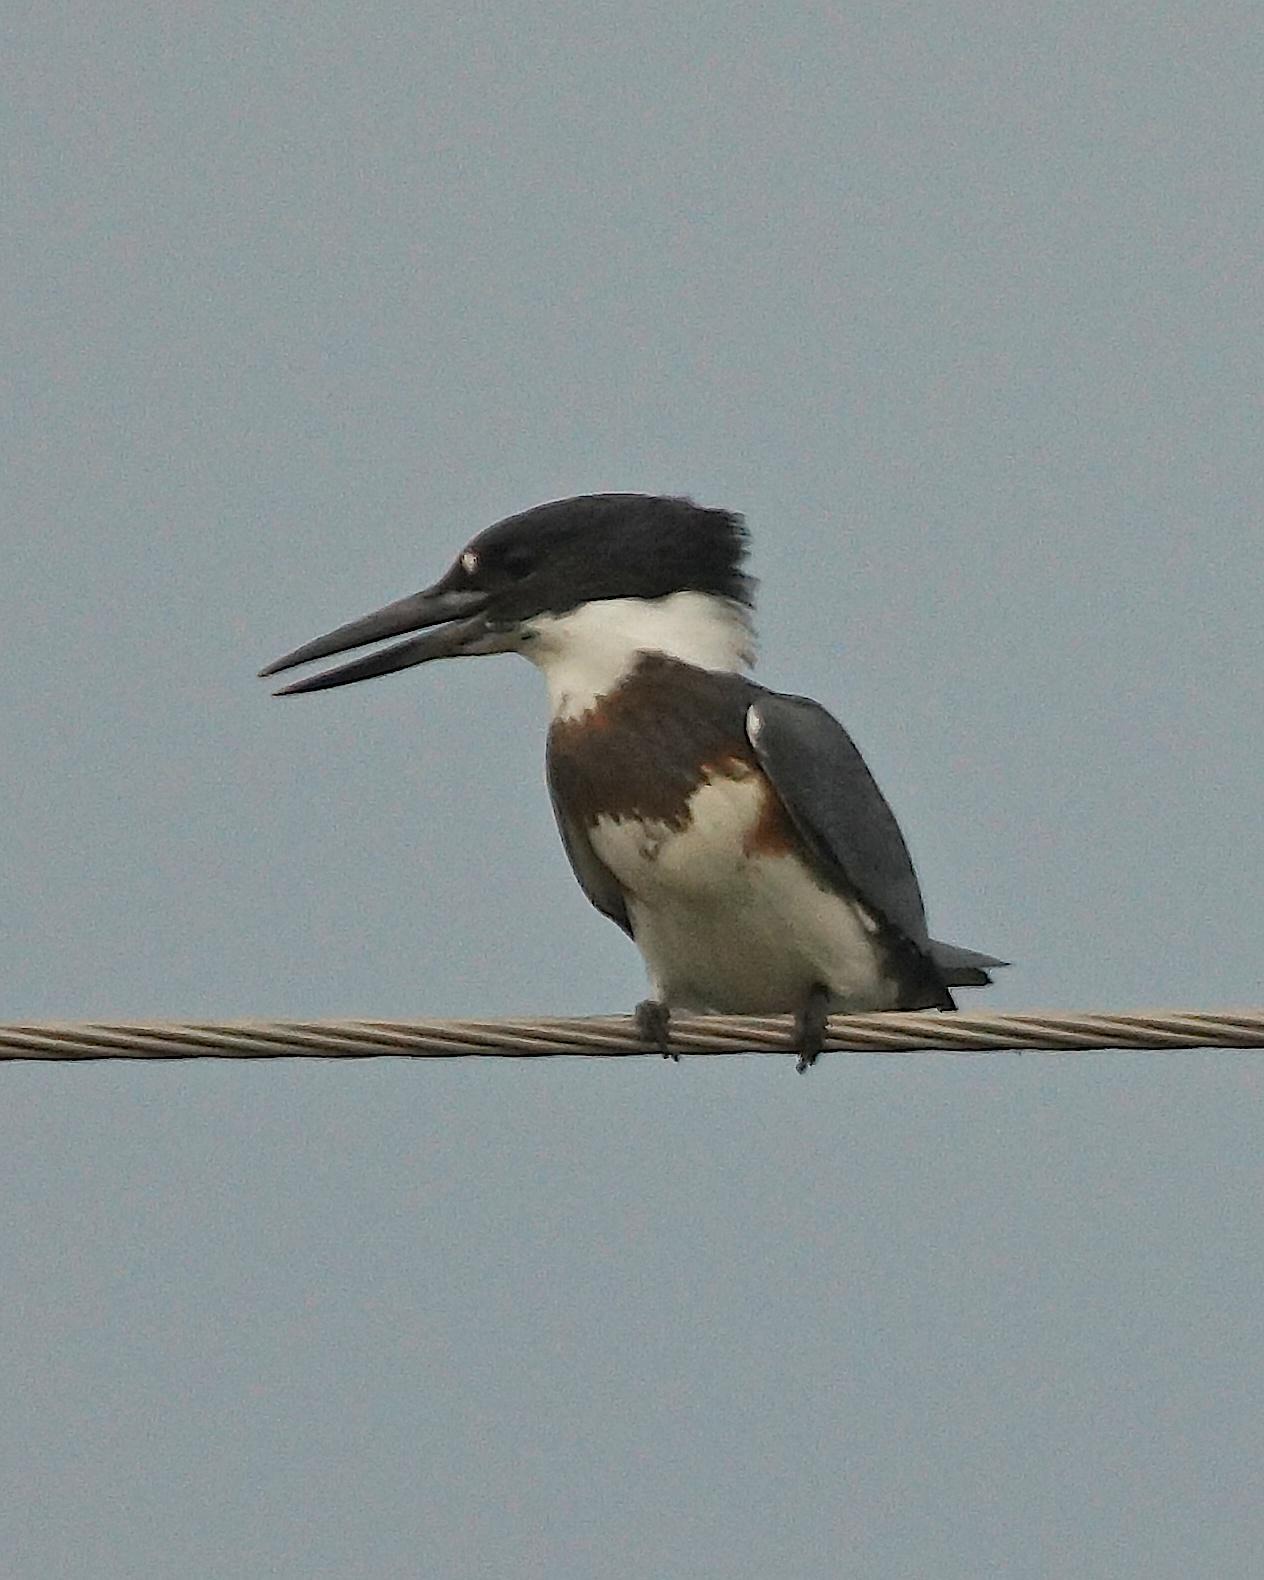 Belted Kingfisher Photo by Gerald Hoekstra